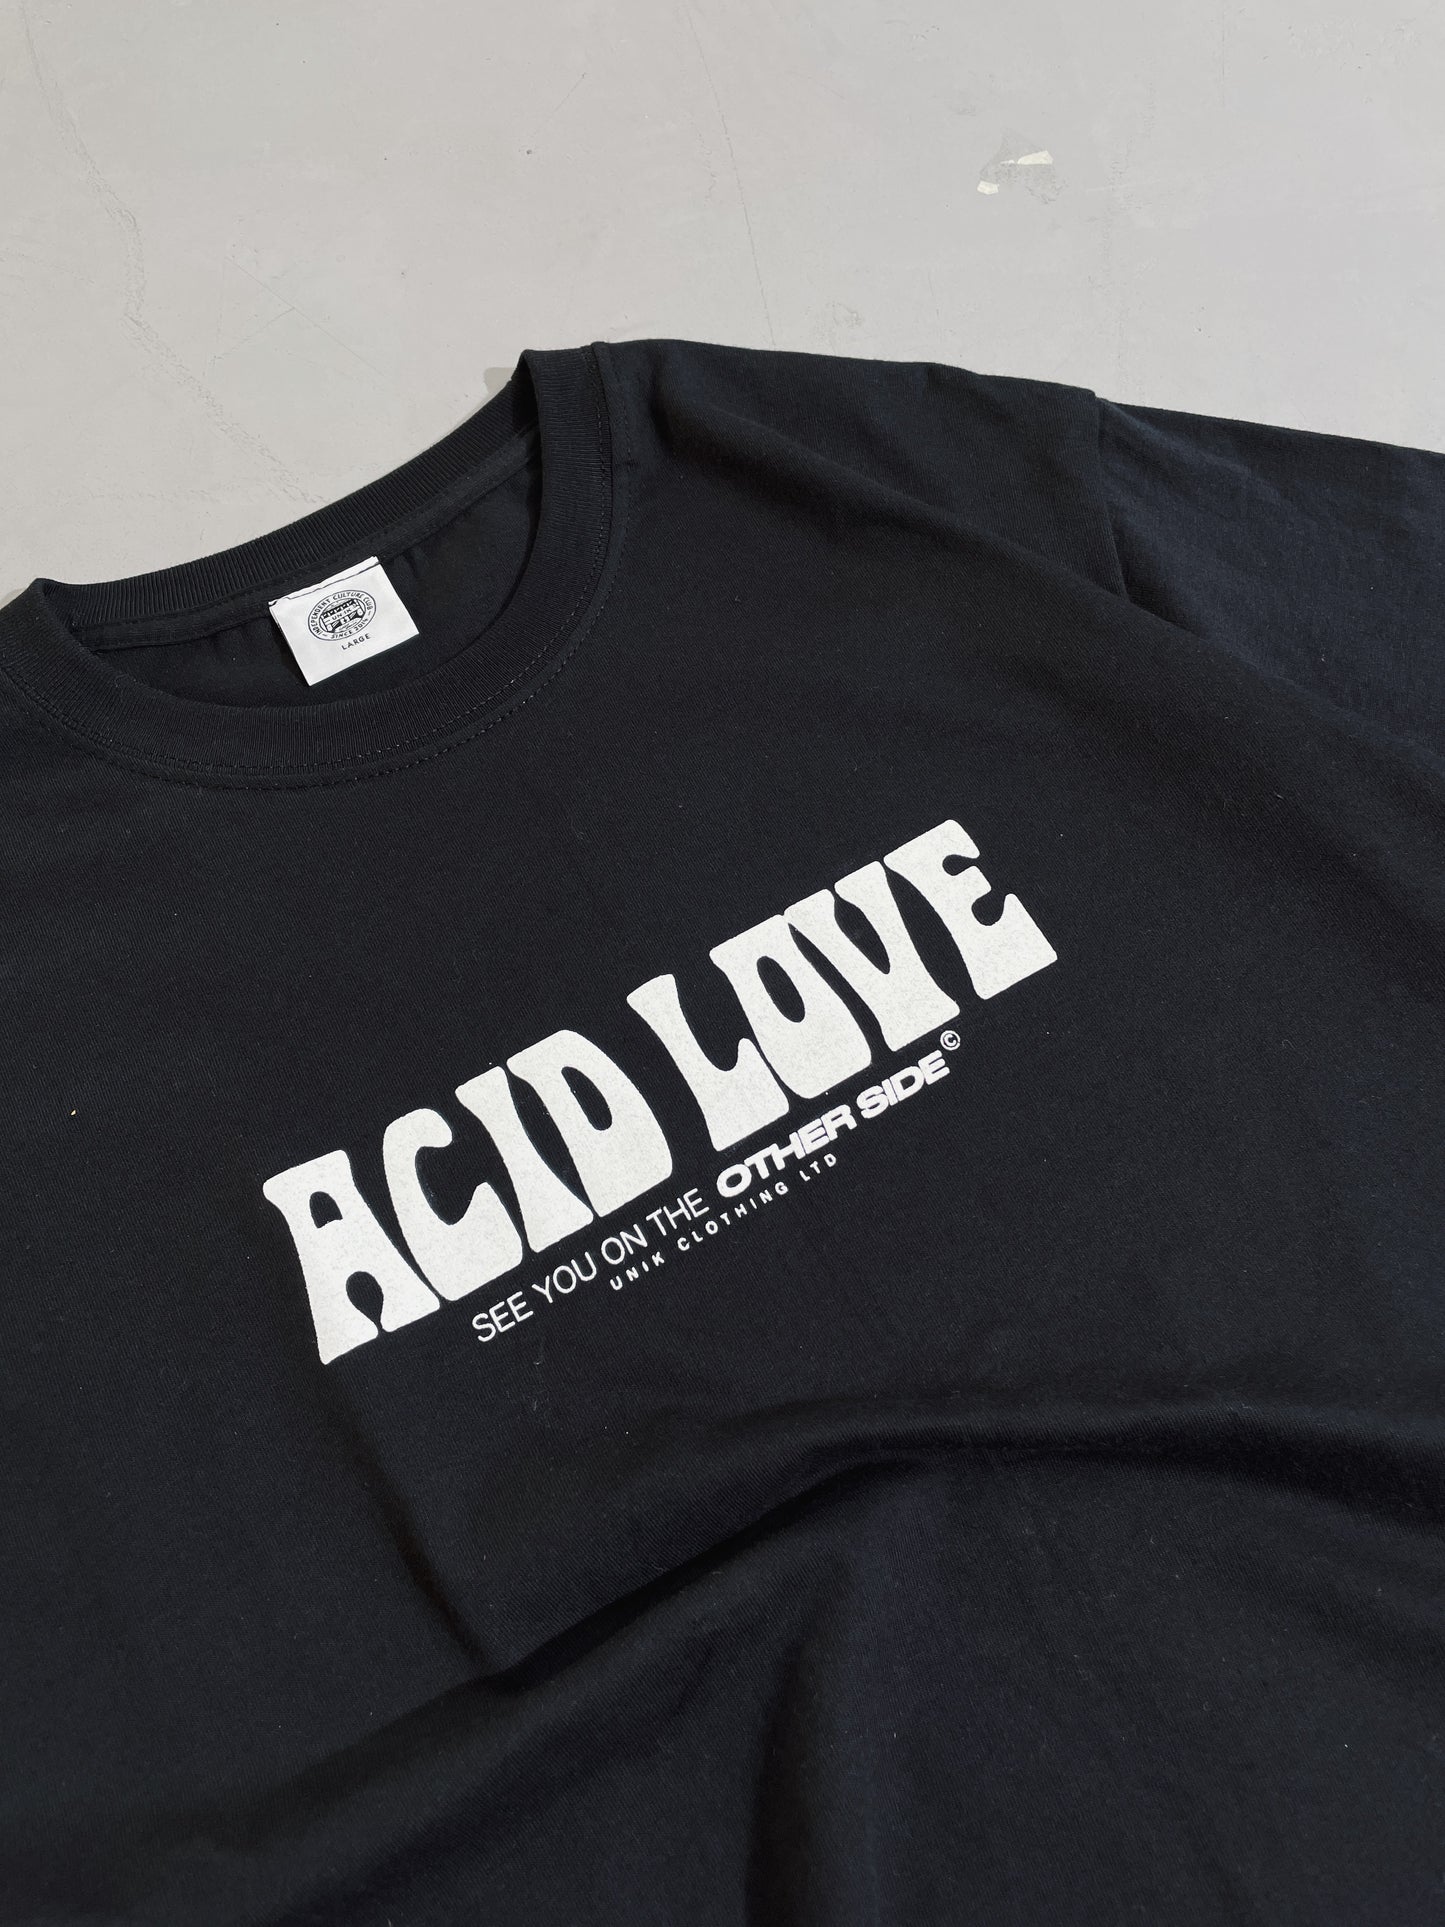 ACID LOVE 0.06 'Other Side' Tee - Black *1 OF 100 EXCLUSIVE*